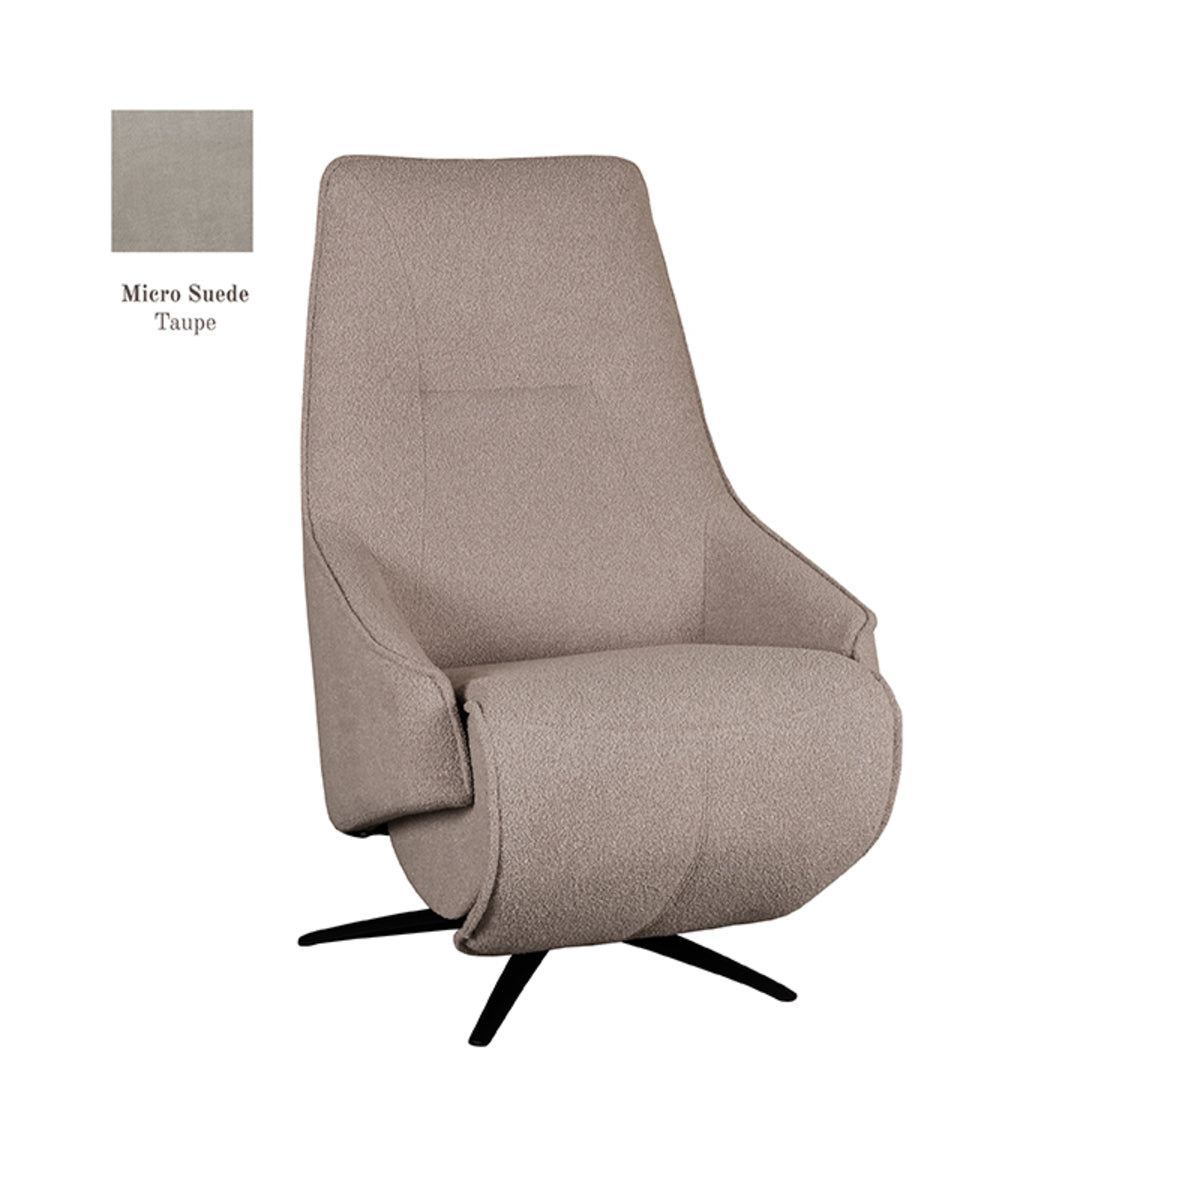 LABEL51 Fauteuil Odense - Taupe - Micro Suede - Elektrische